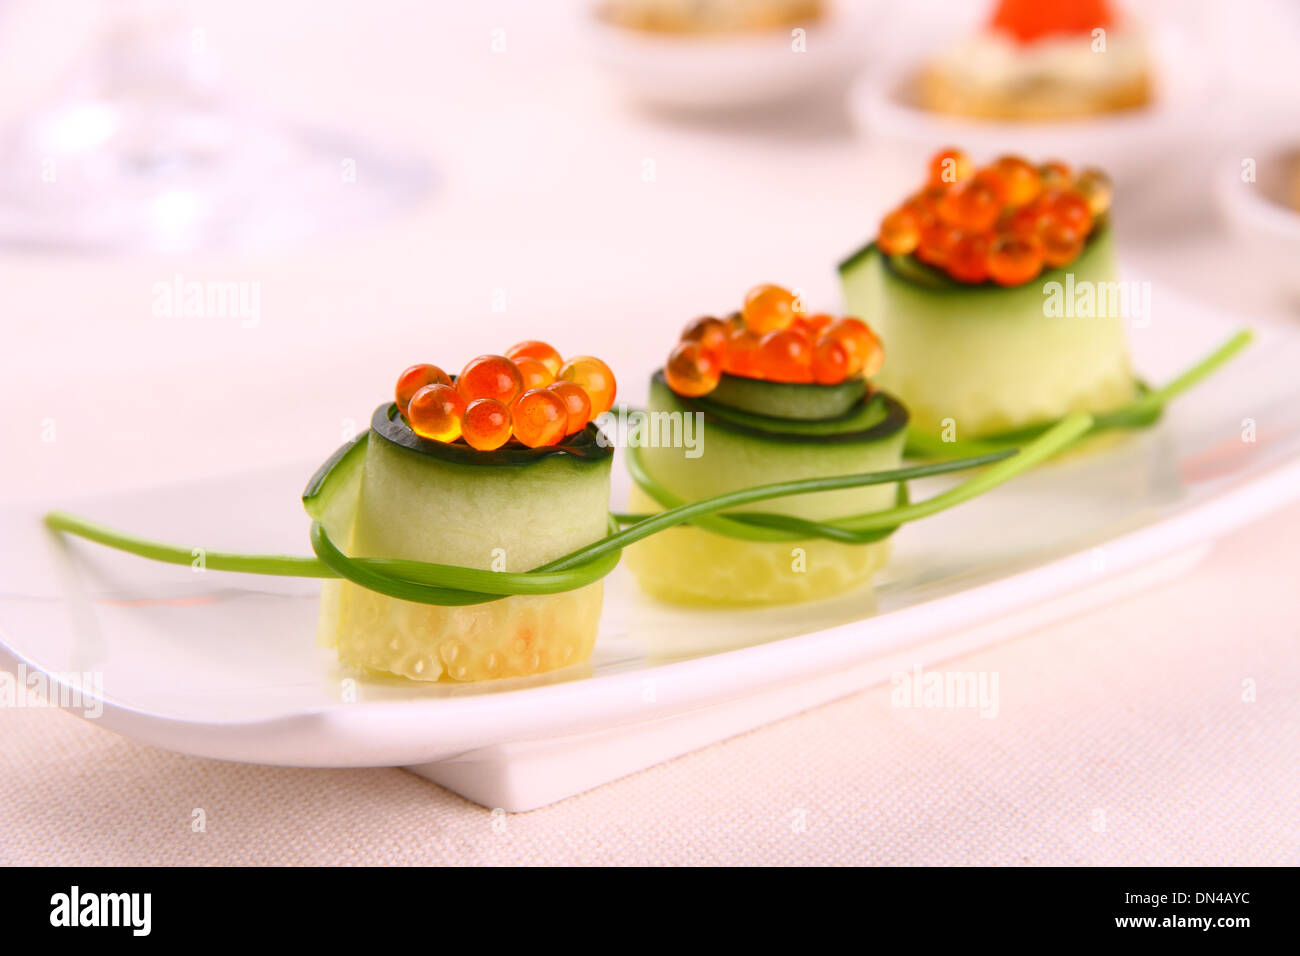 Red caviar on fresh cucumber as snack, close up Stock Photo